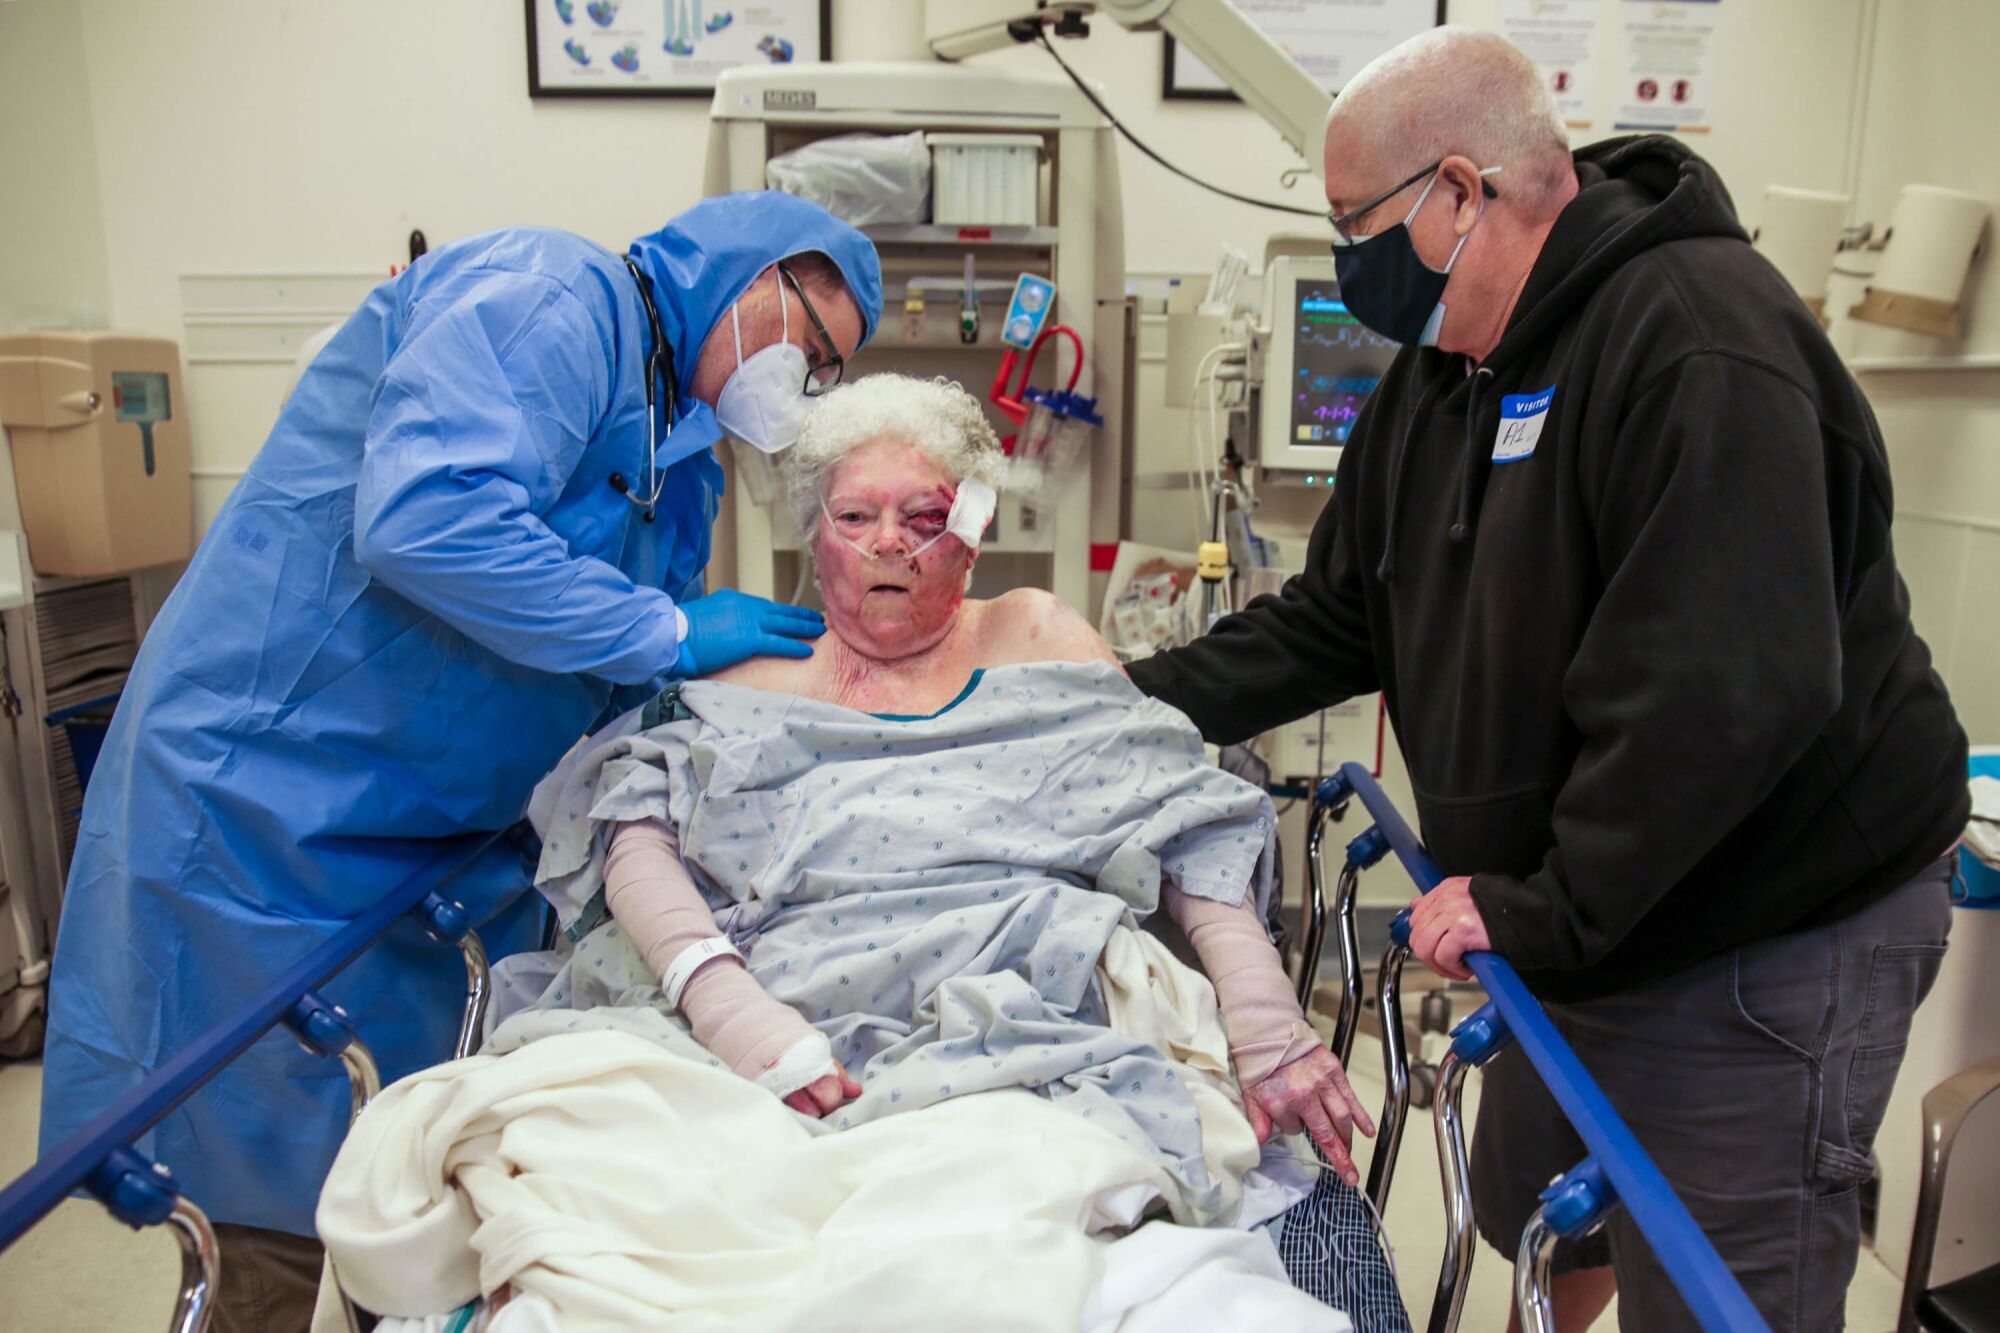 Dr. Troy Pennington attends to a woman injured in a fall.